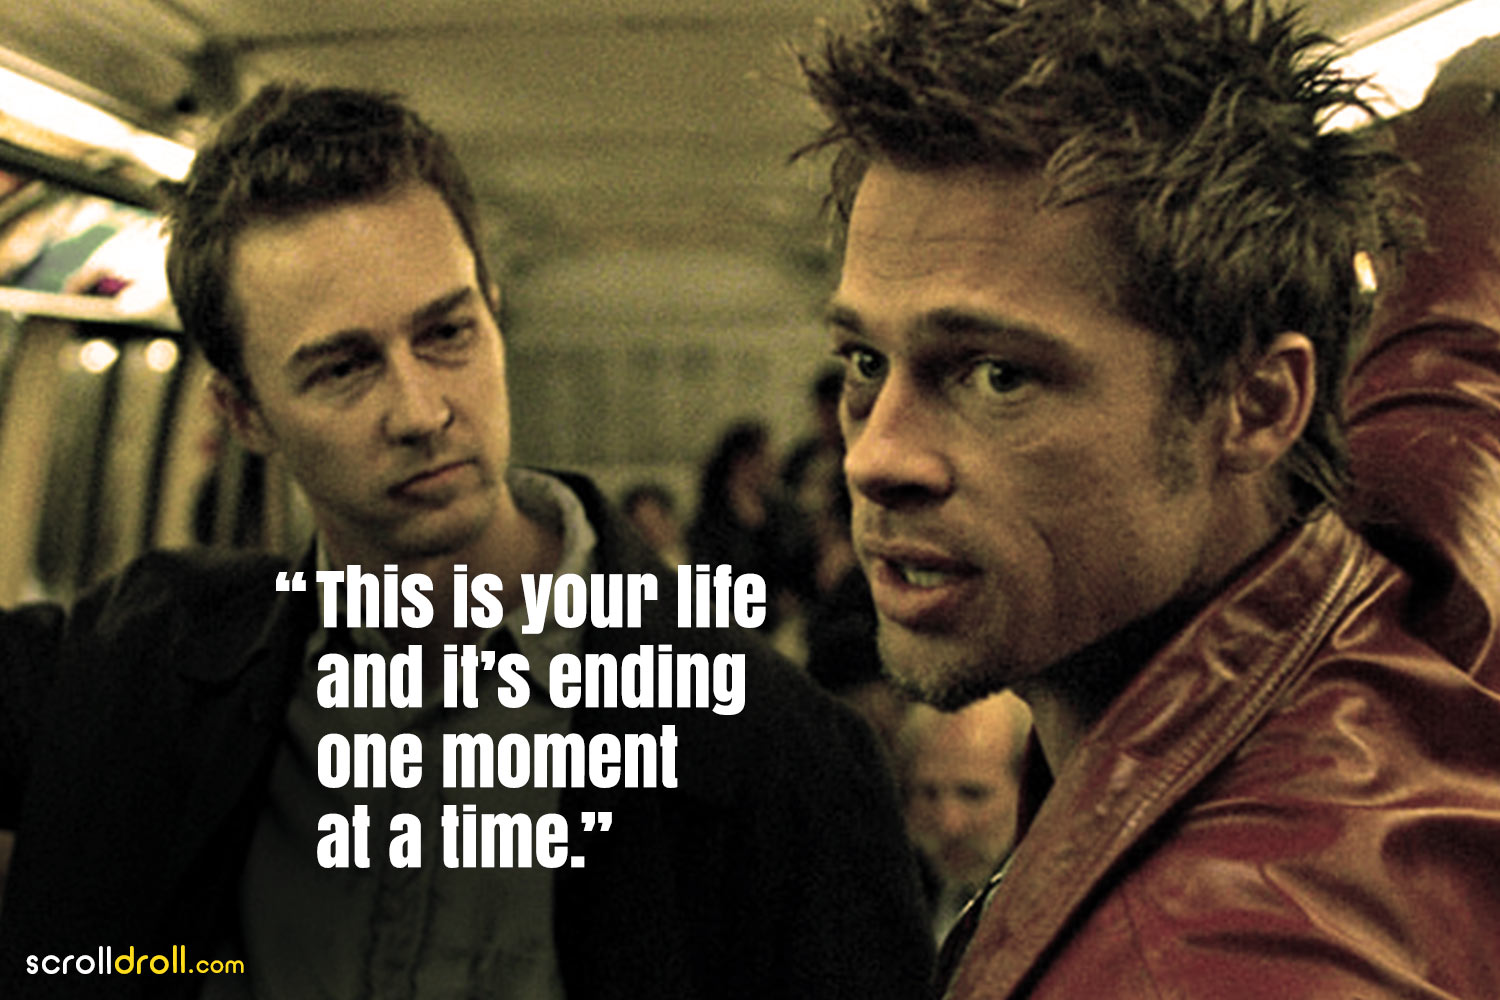 Fight Club Quotes That’ll Give You Insightful-Chills for our spirit